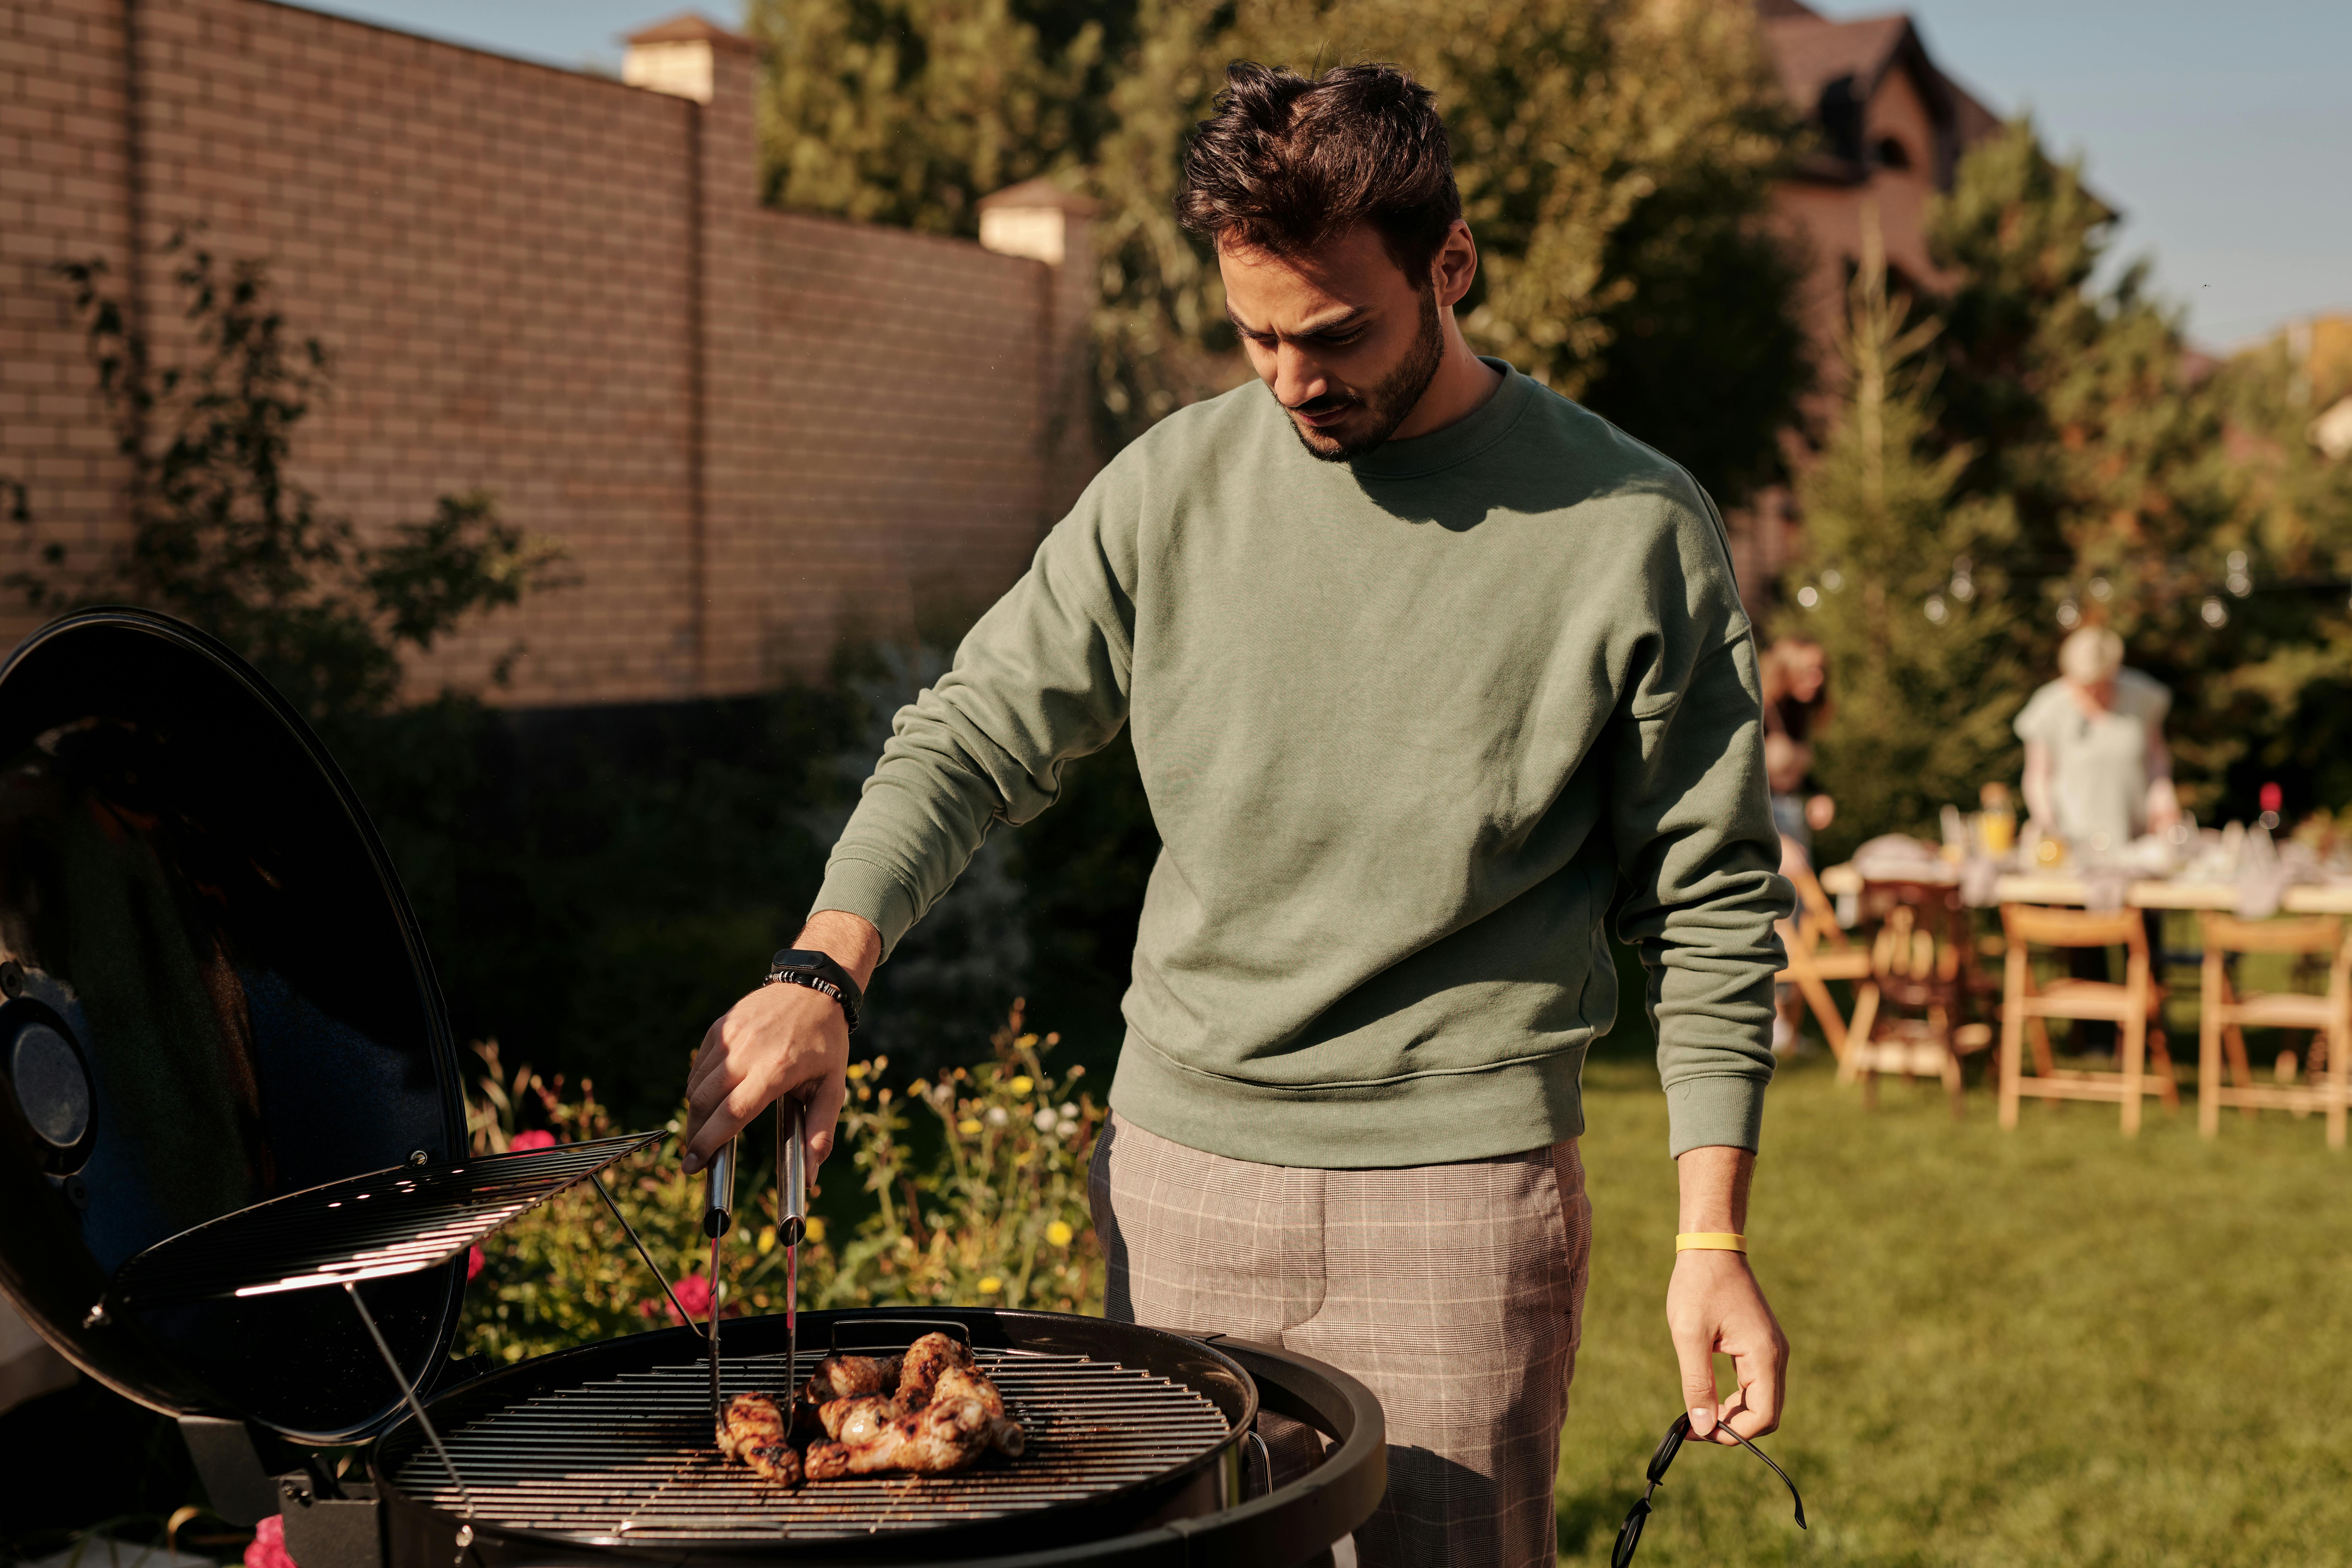 Man cooks at a barbecue | Source: Pexels